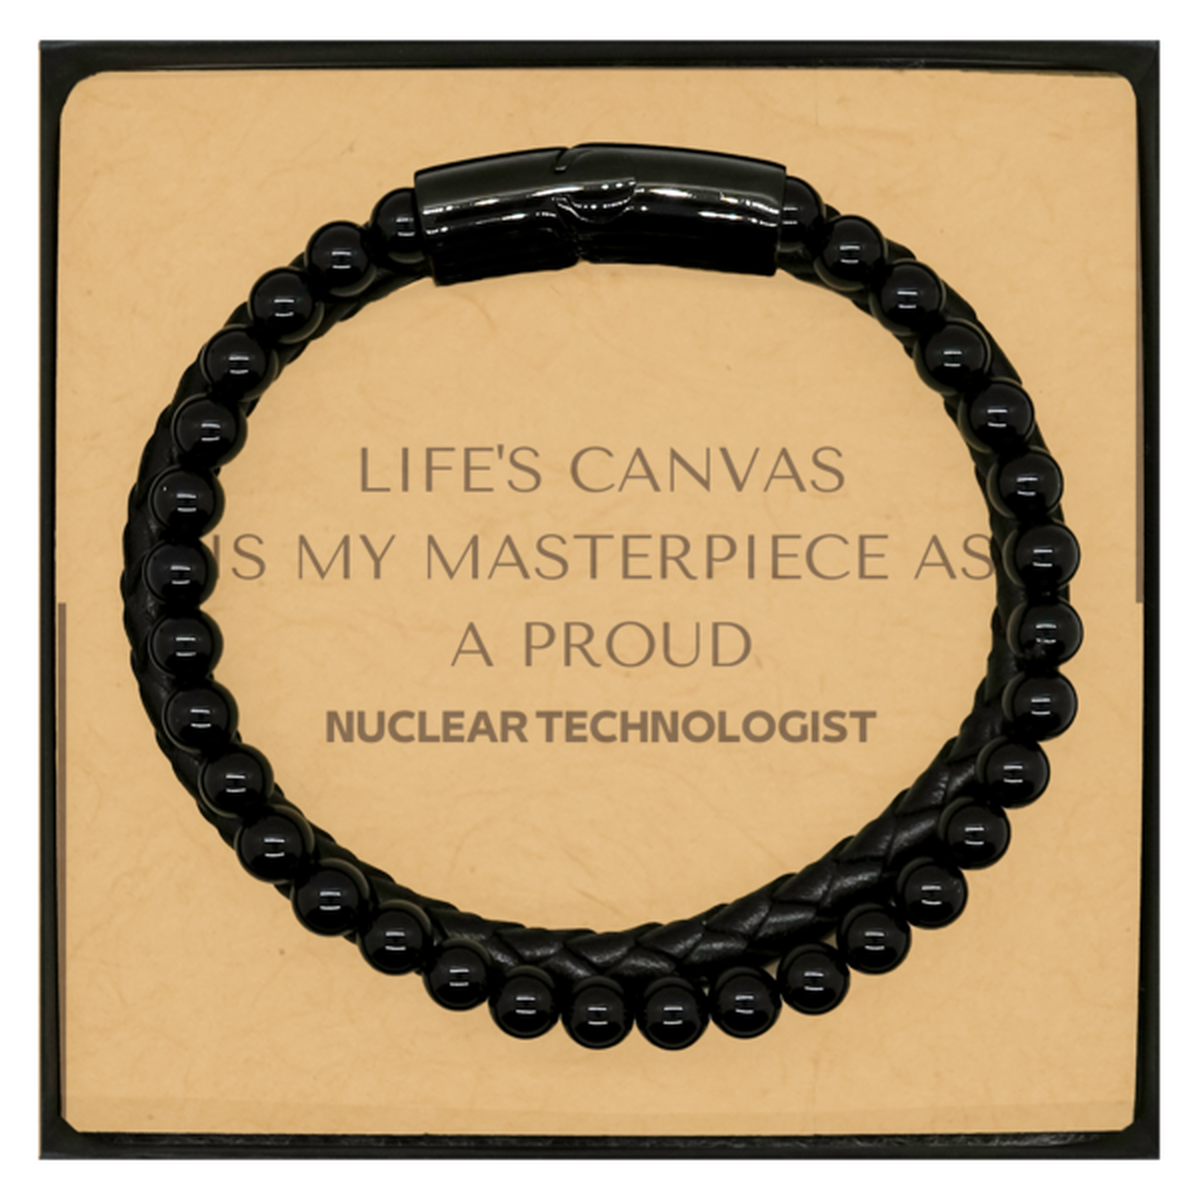 Proud Nuclear Technologist Gifts, Life's canvas is my masterpiece, Epic Birthday Christmas Unique Stone Leather Bracelets For Nuclear Technologist, Coworkers, Men, Women, Friends